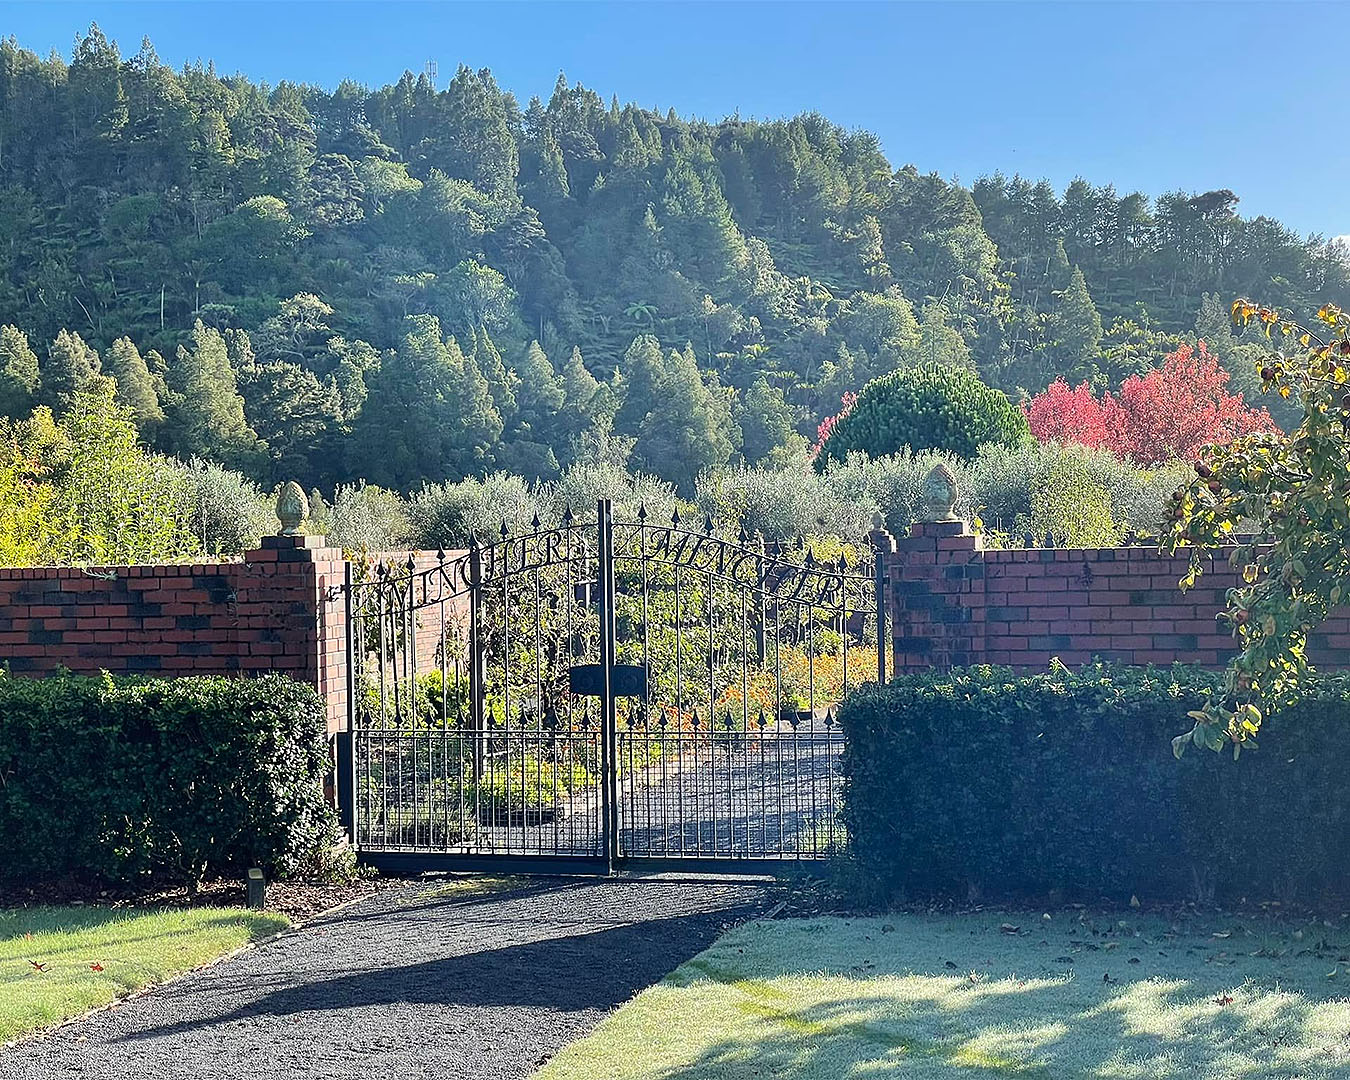 The gates of Mincher Gardens with beautiful trees in the background.